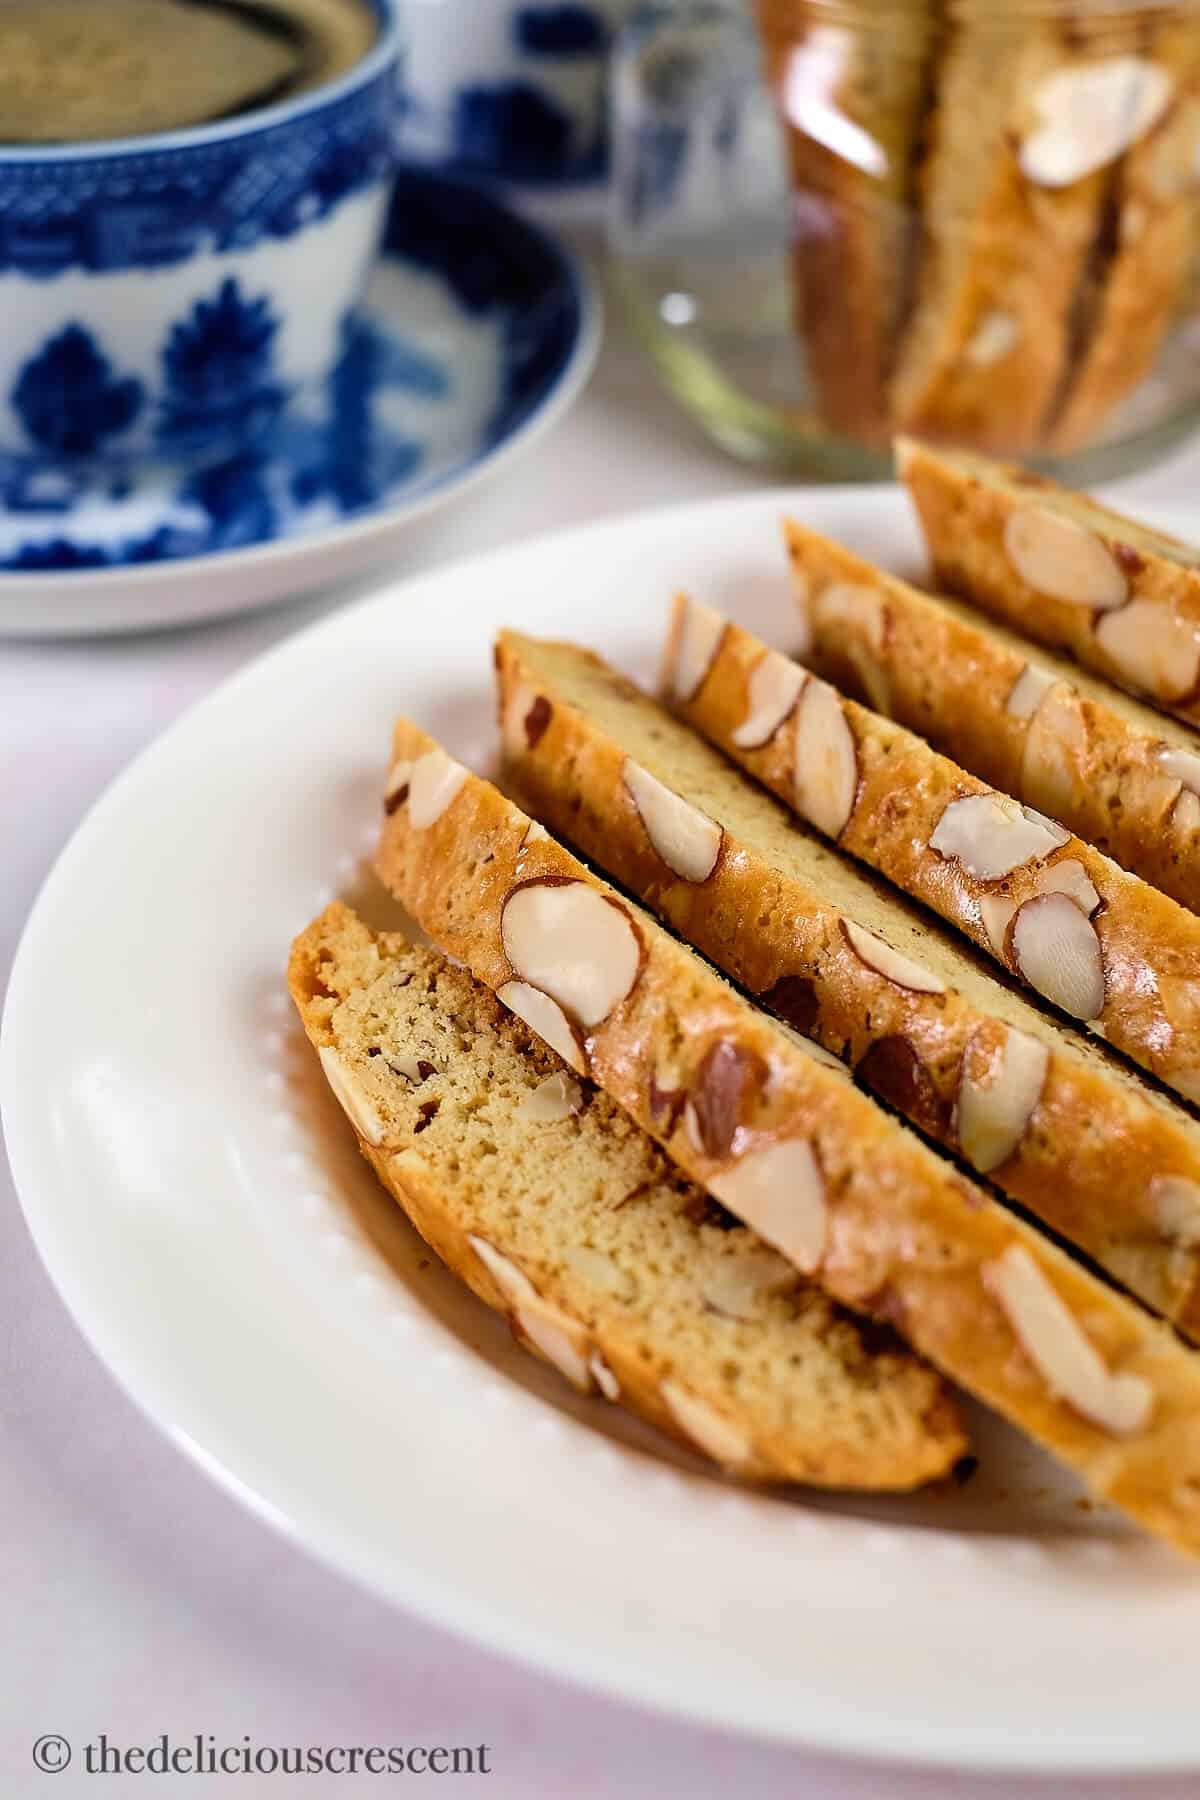 Almond biscotti served on a white plate.